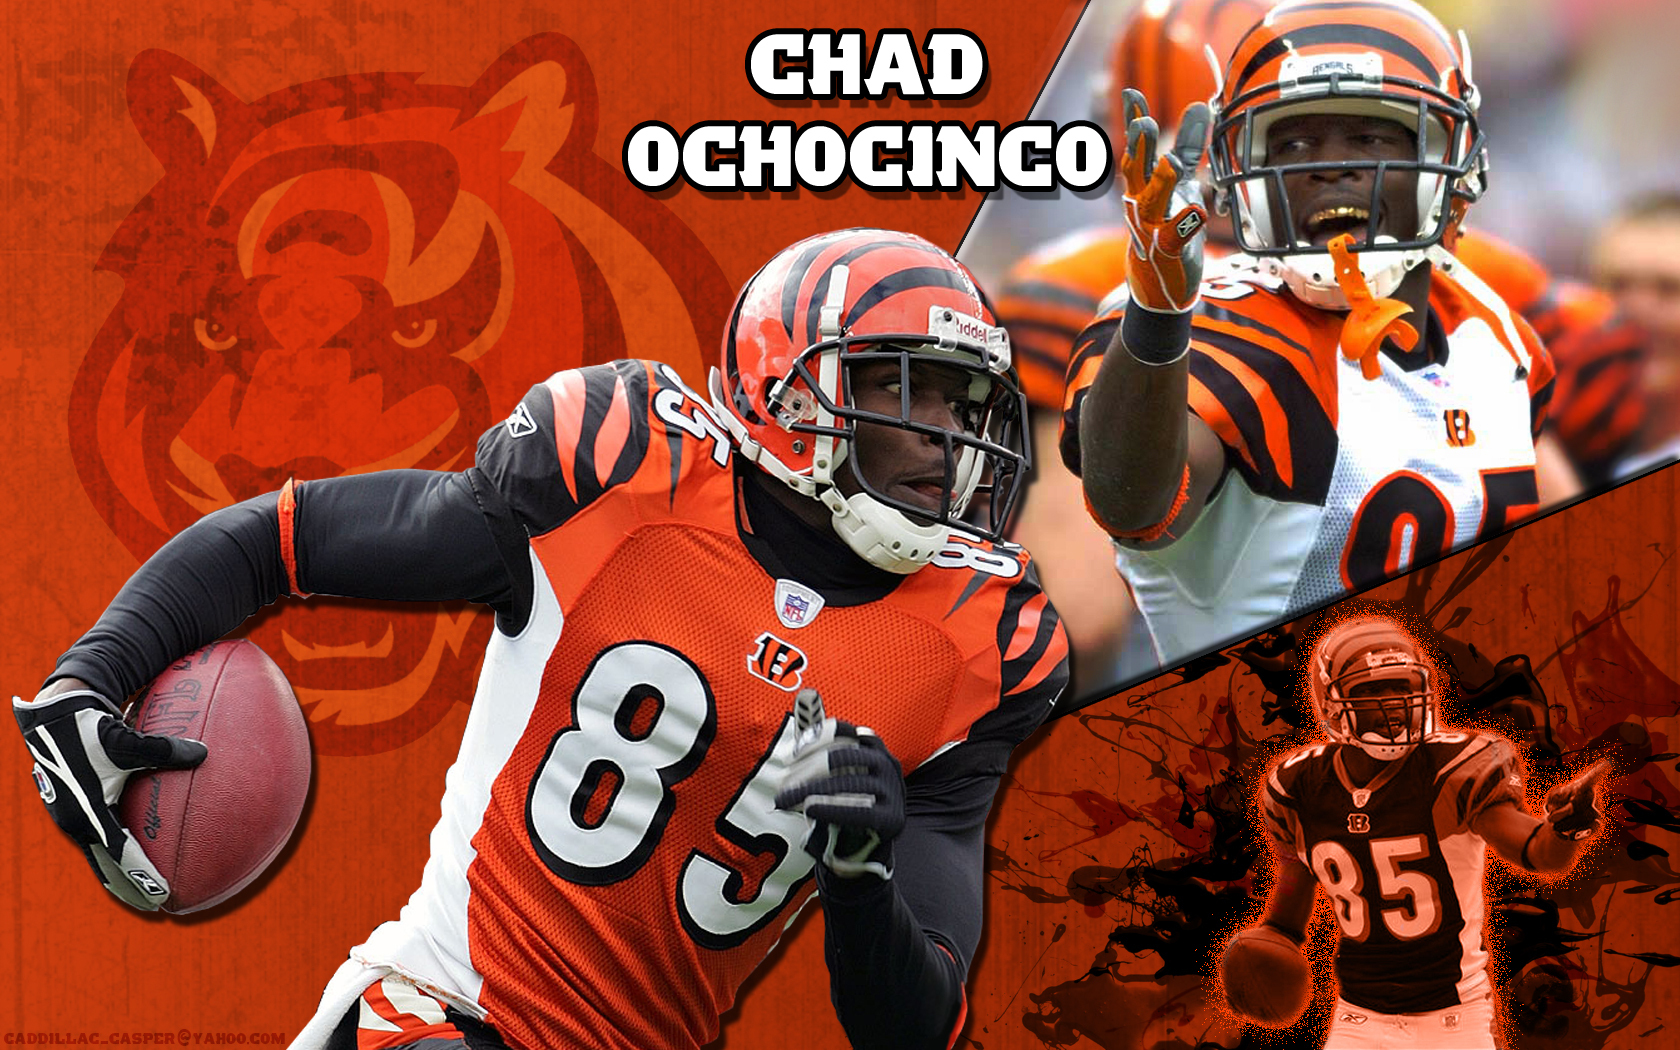 Wallpaper of chad ochocinco for fans of Chad Ochocinco. chad ochocinco.